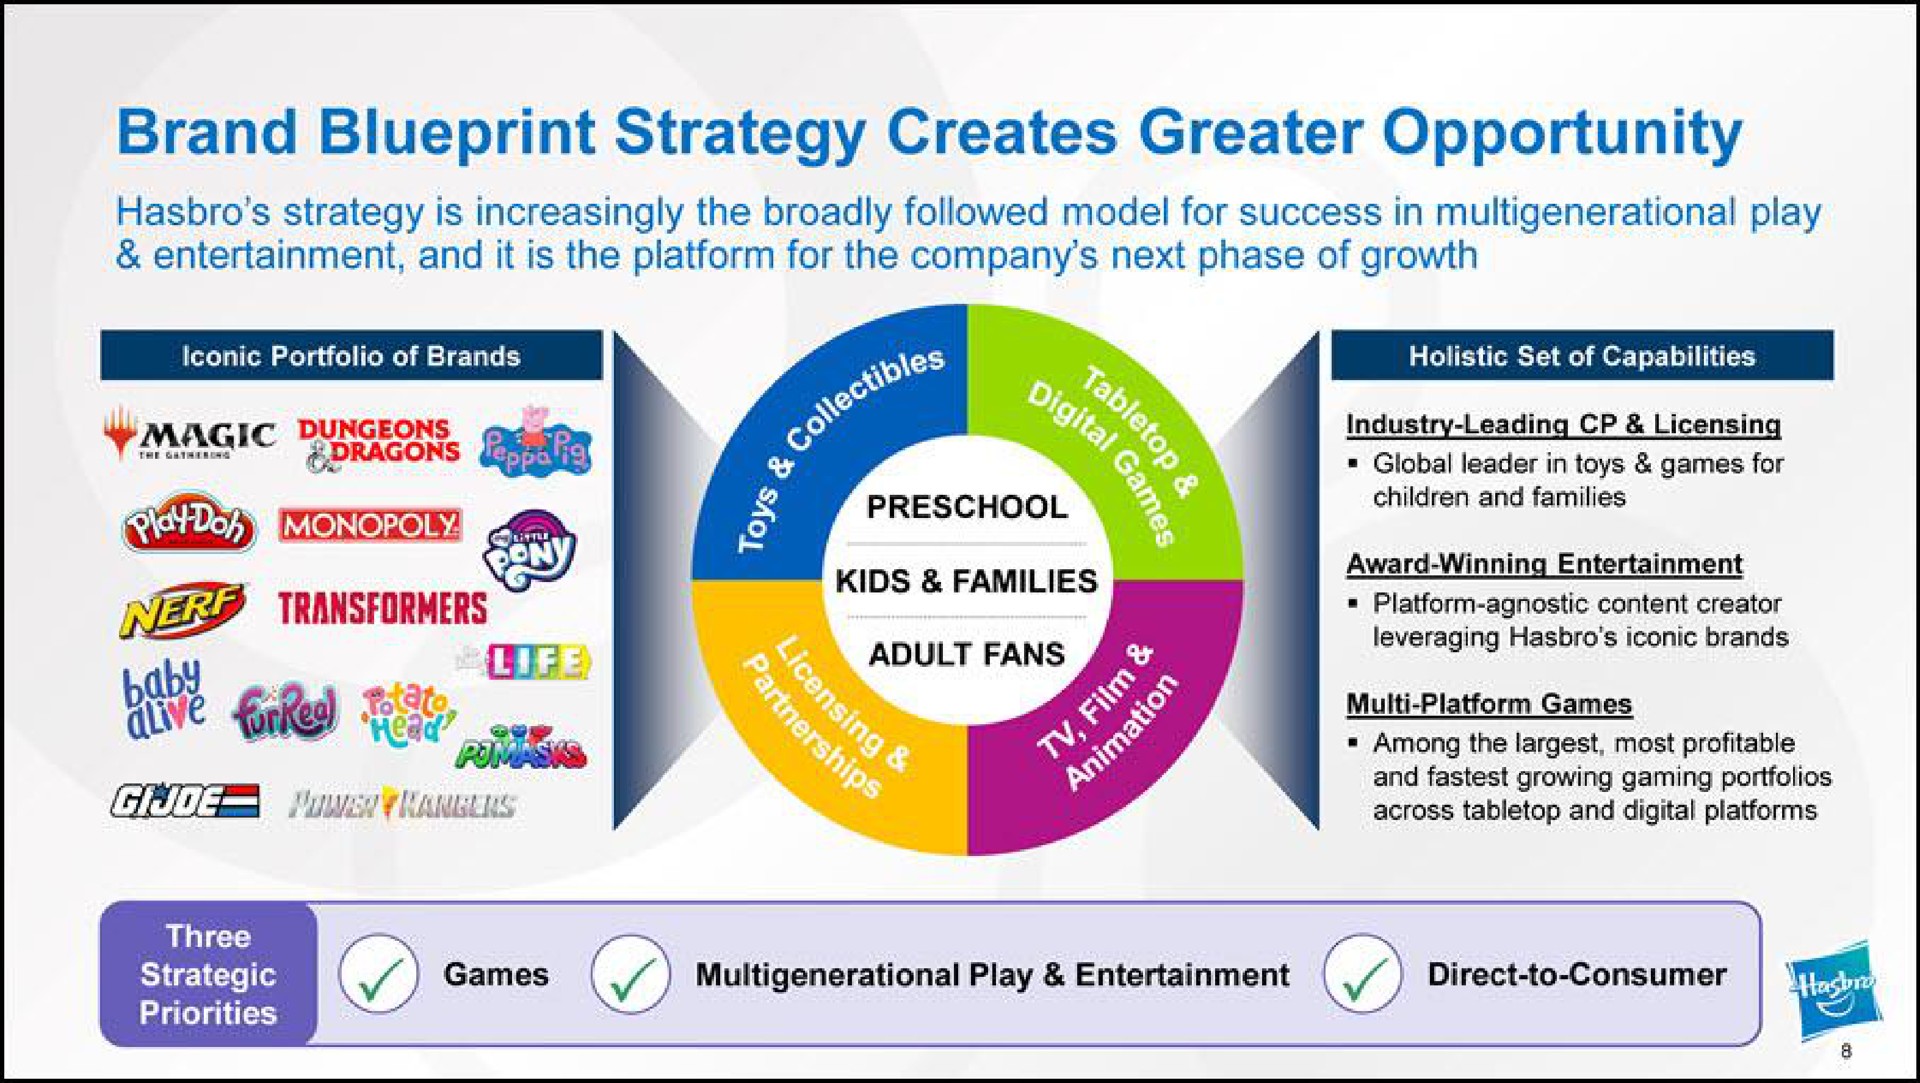 brand blueprint strategy creates greater opportunity strategy is increasingly the broadly followed model for success in play entertainment and it is the platform for the company next phase of growth yeas nep a i by preschool global leader in toys games for children and families games play entertainment direct to consumer | Hasbro